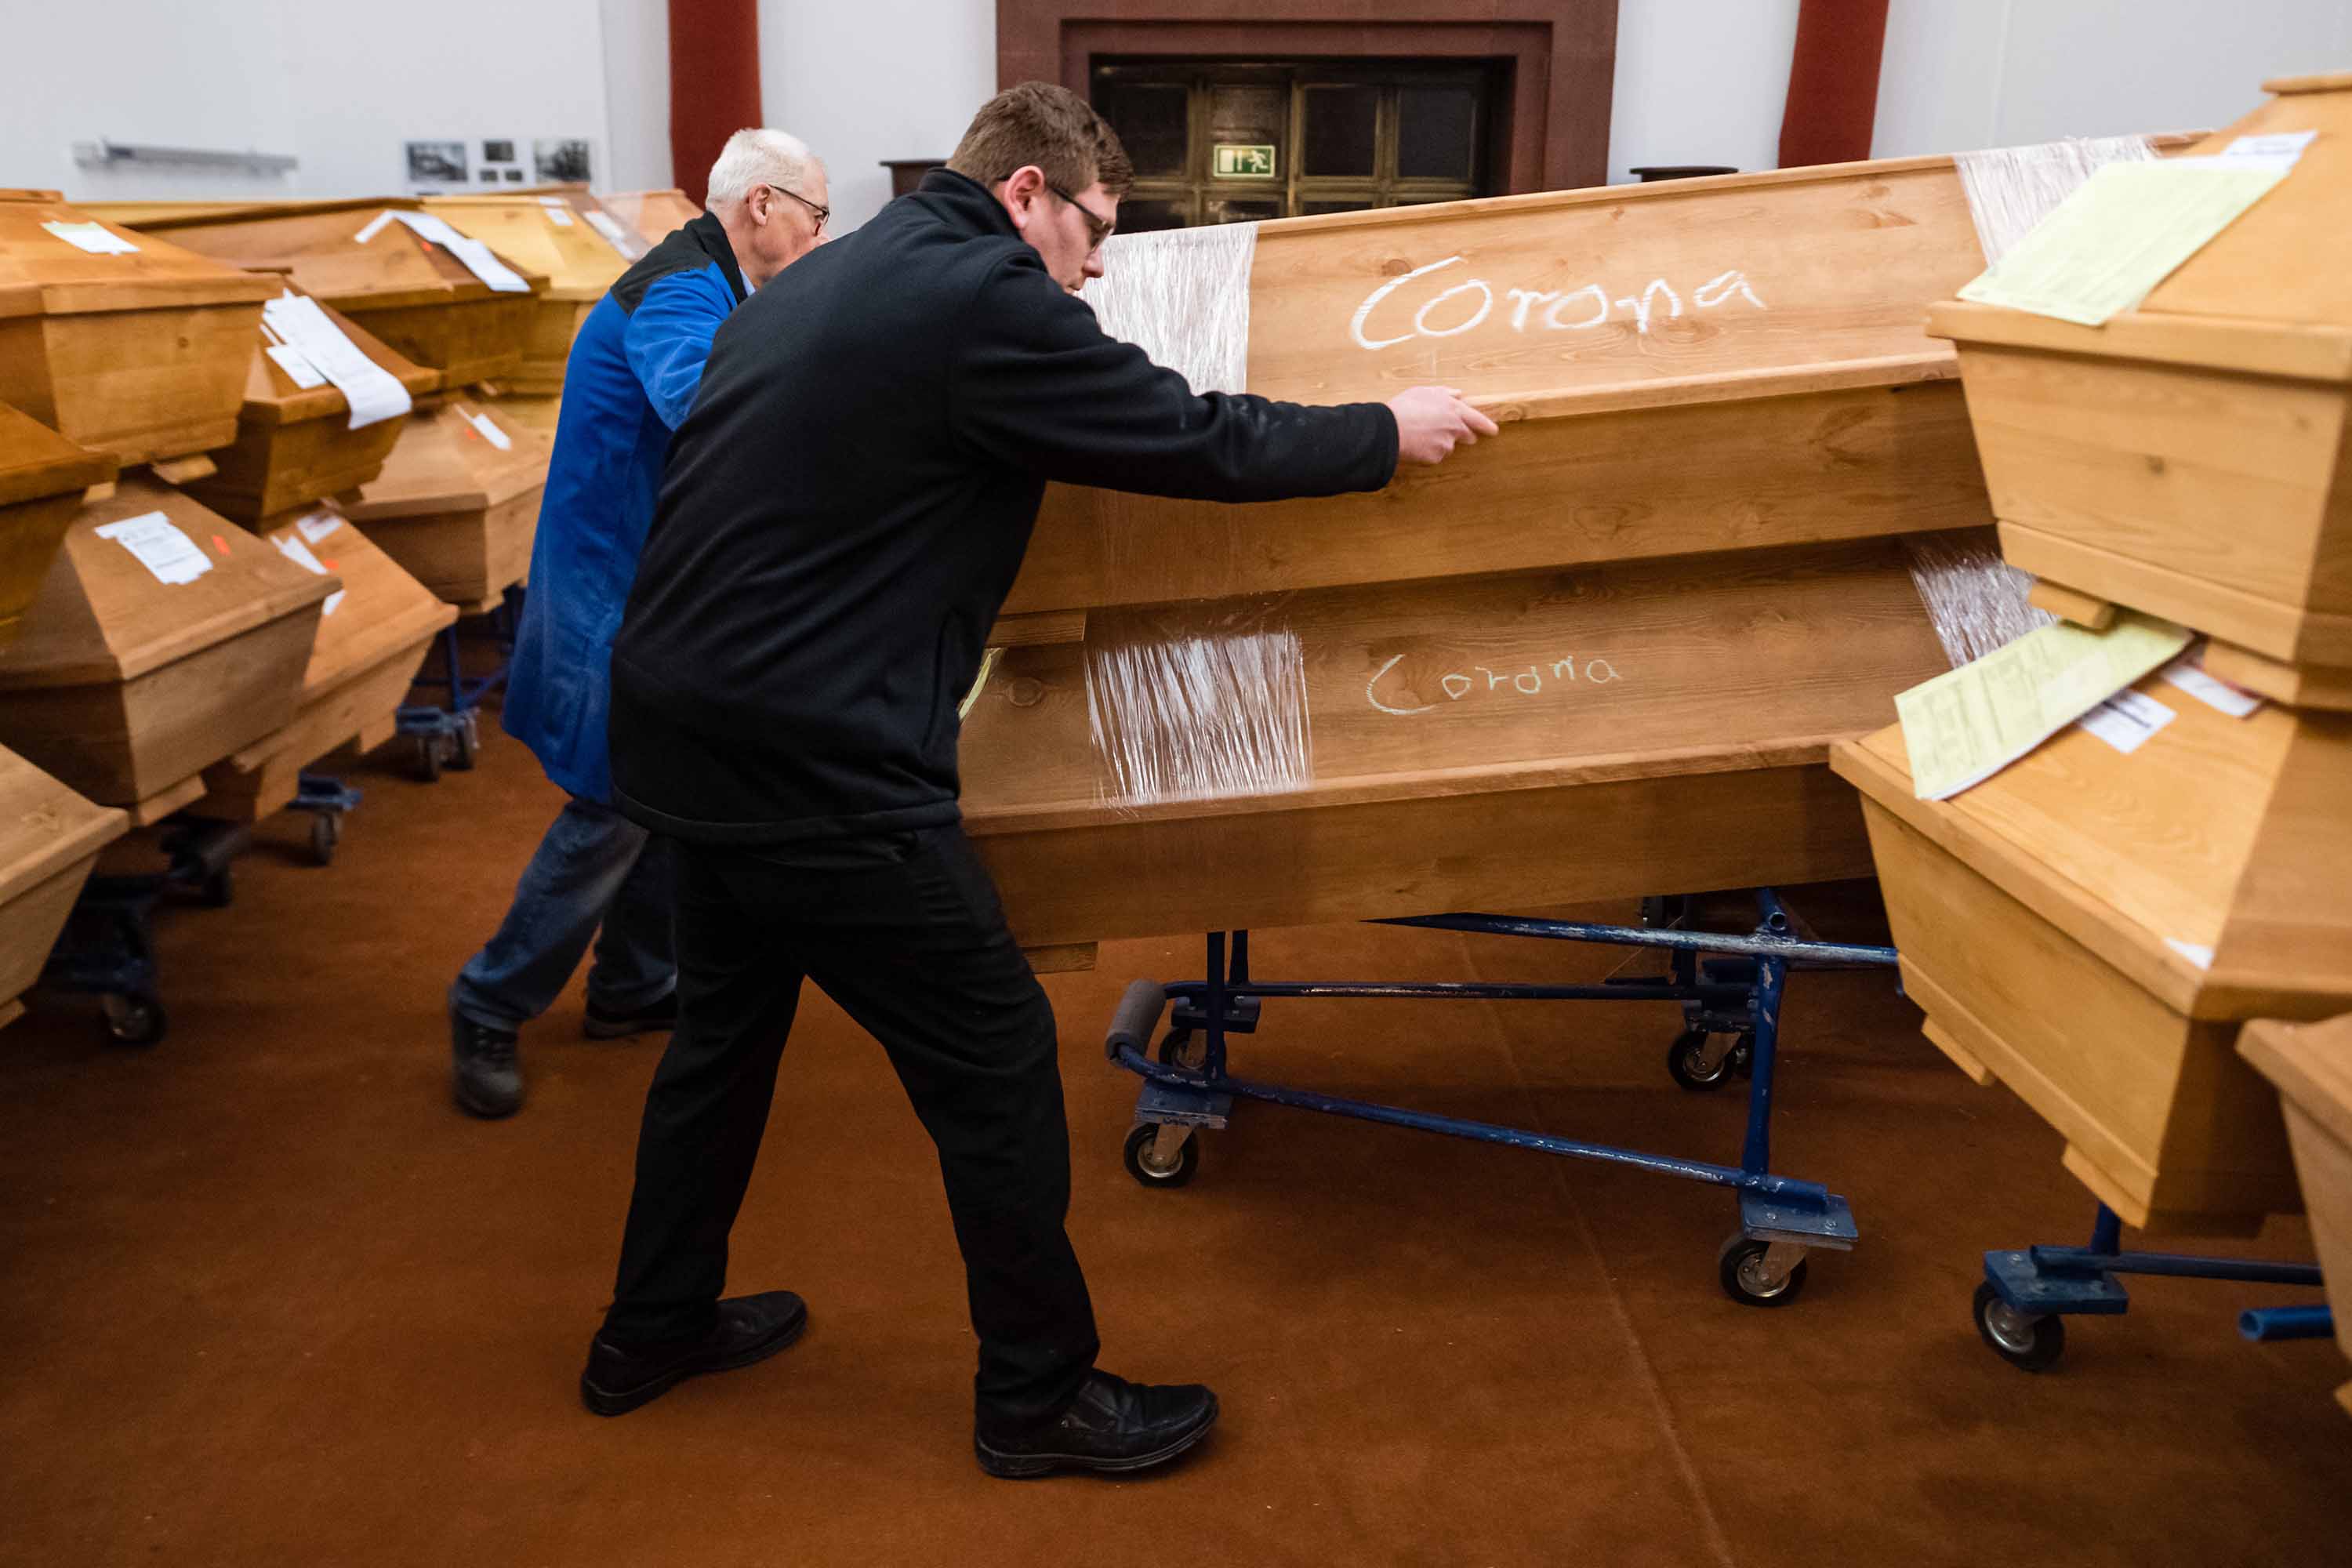 Employees move coffins at a crematorium in Meissen, Germany on January 13.